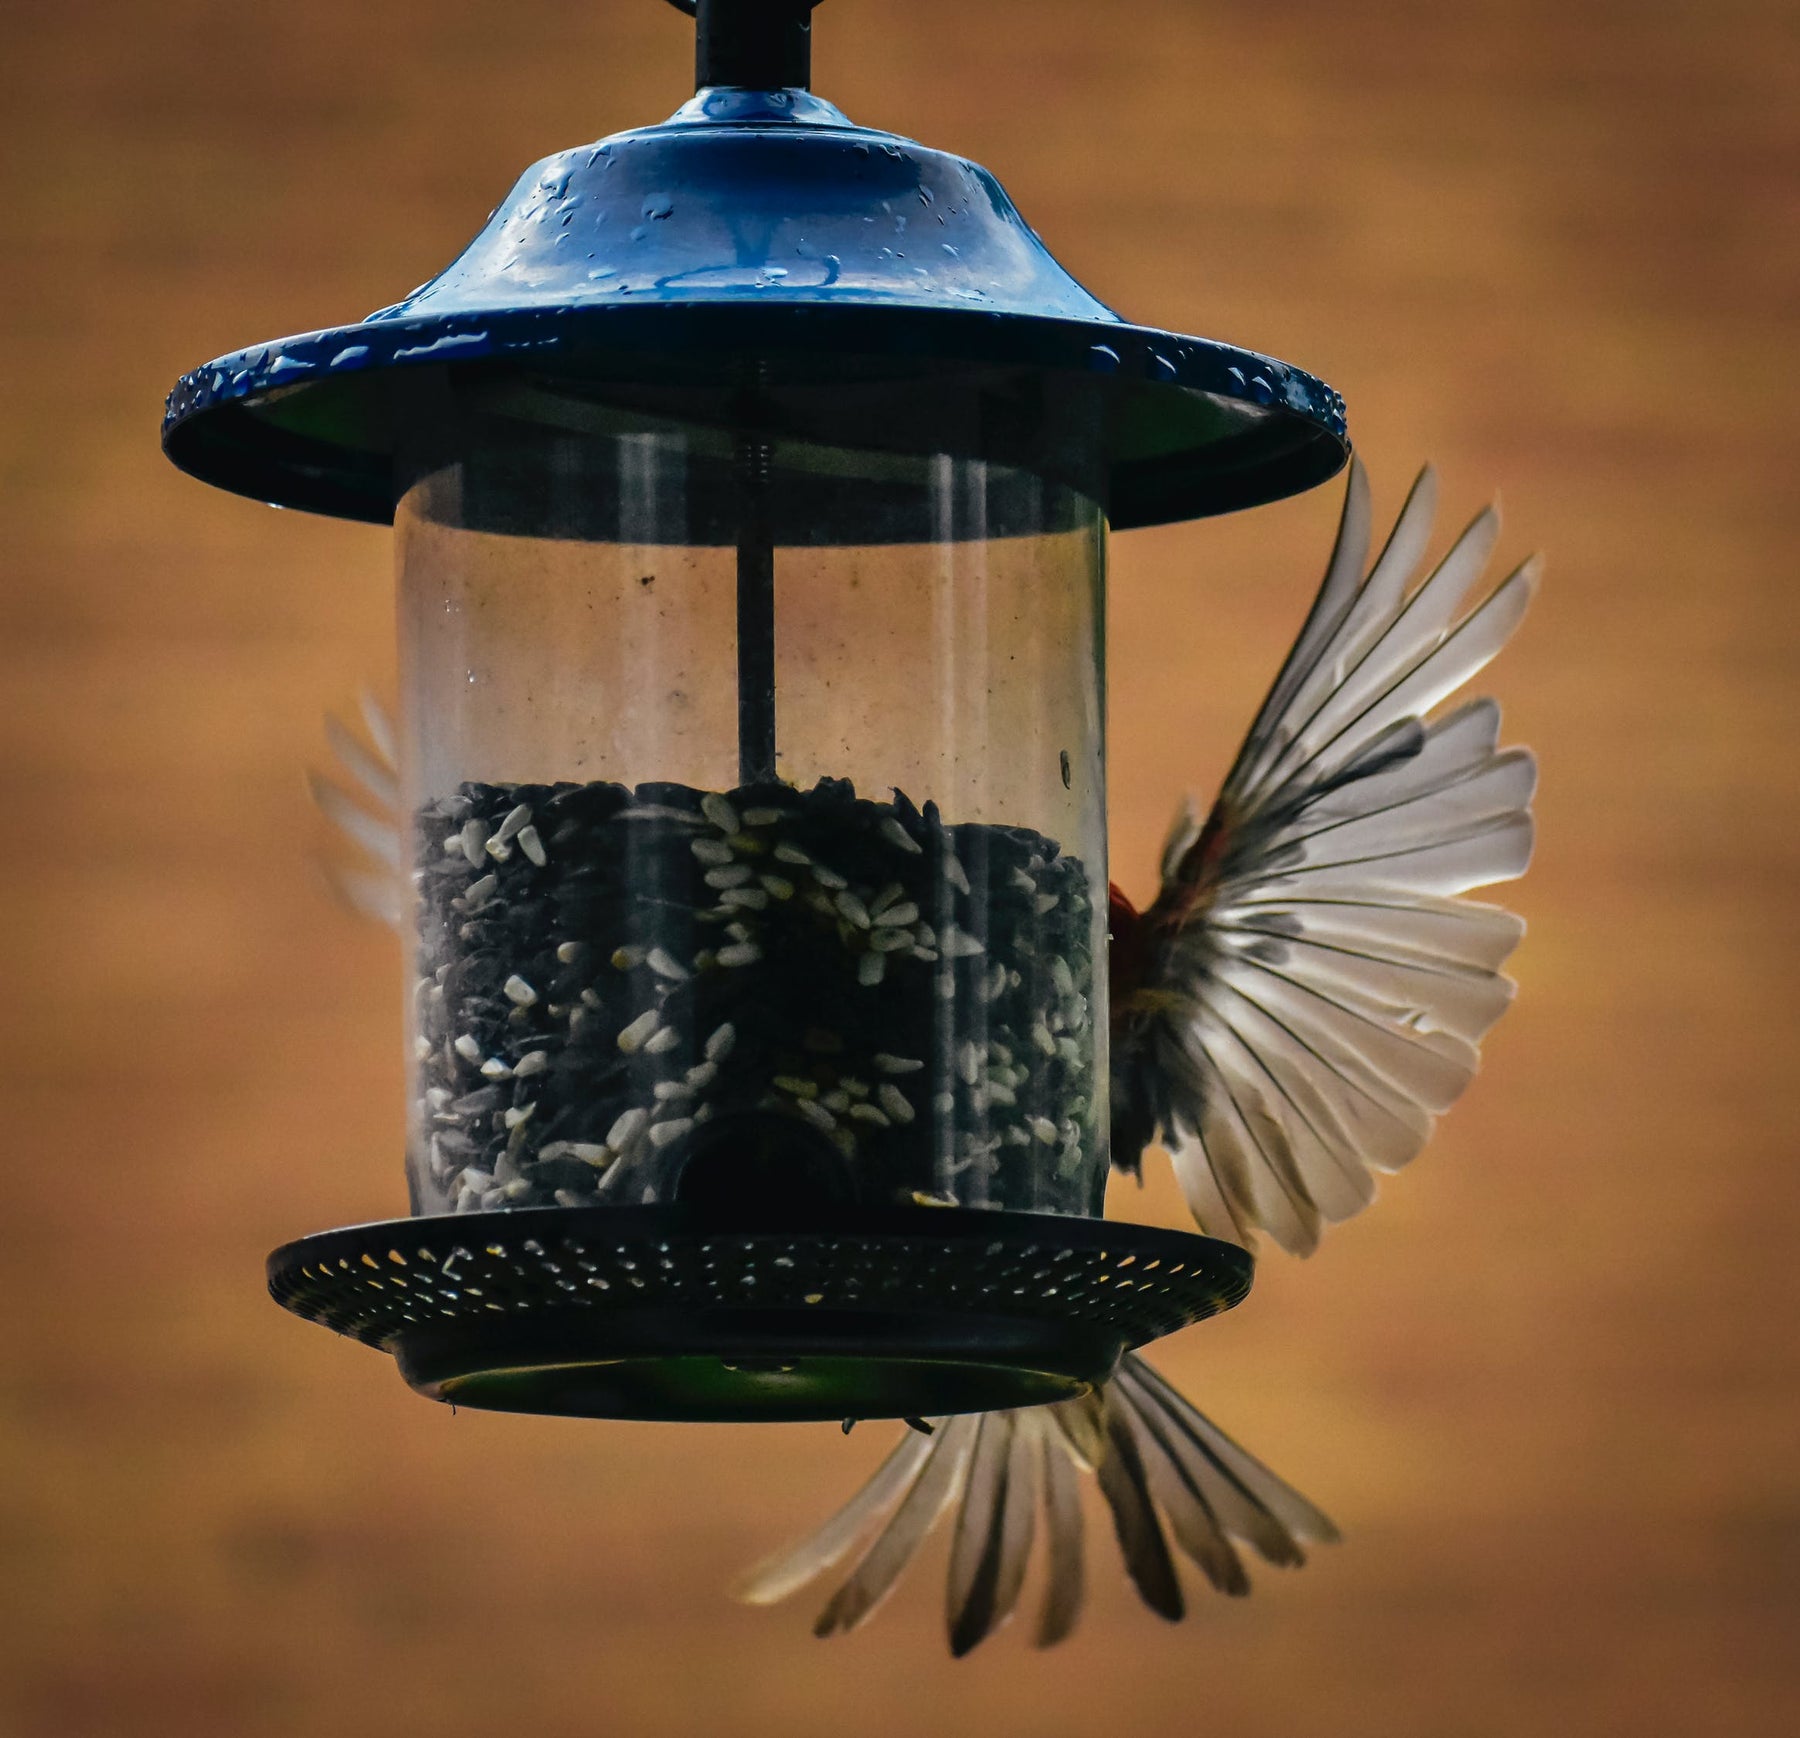 How to Choose the Best Bird Feeder Types for Your Yard or Garden